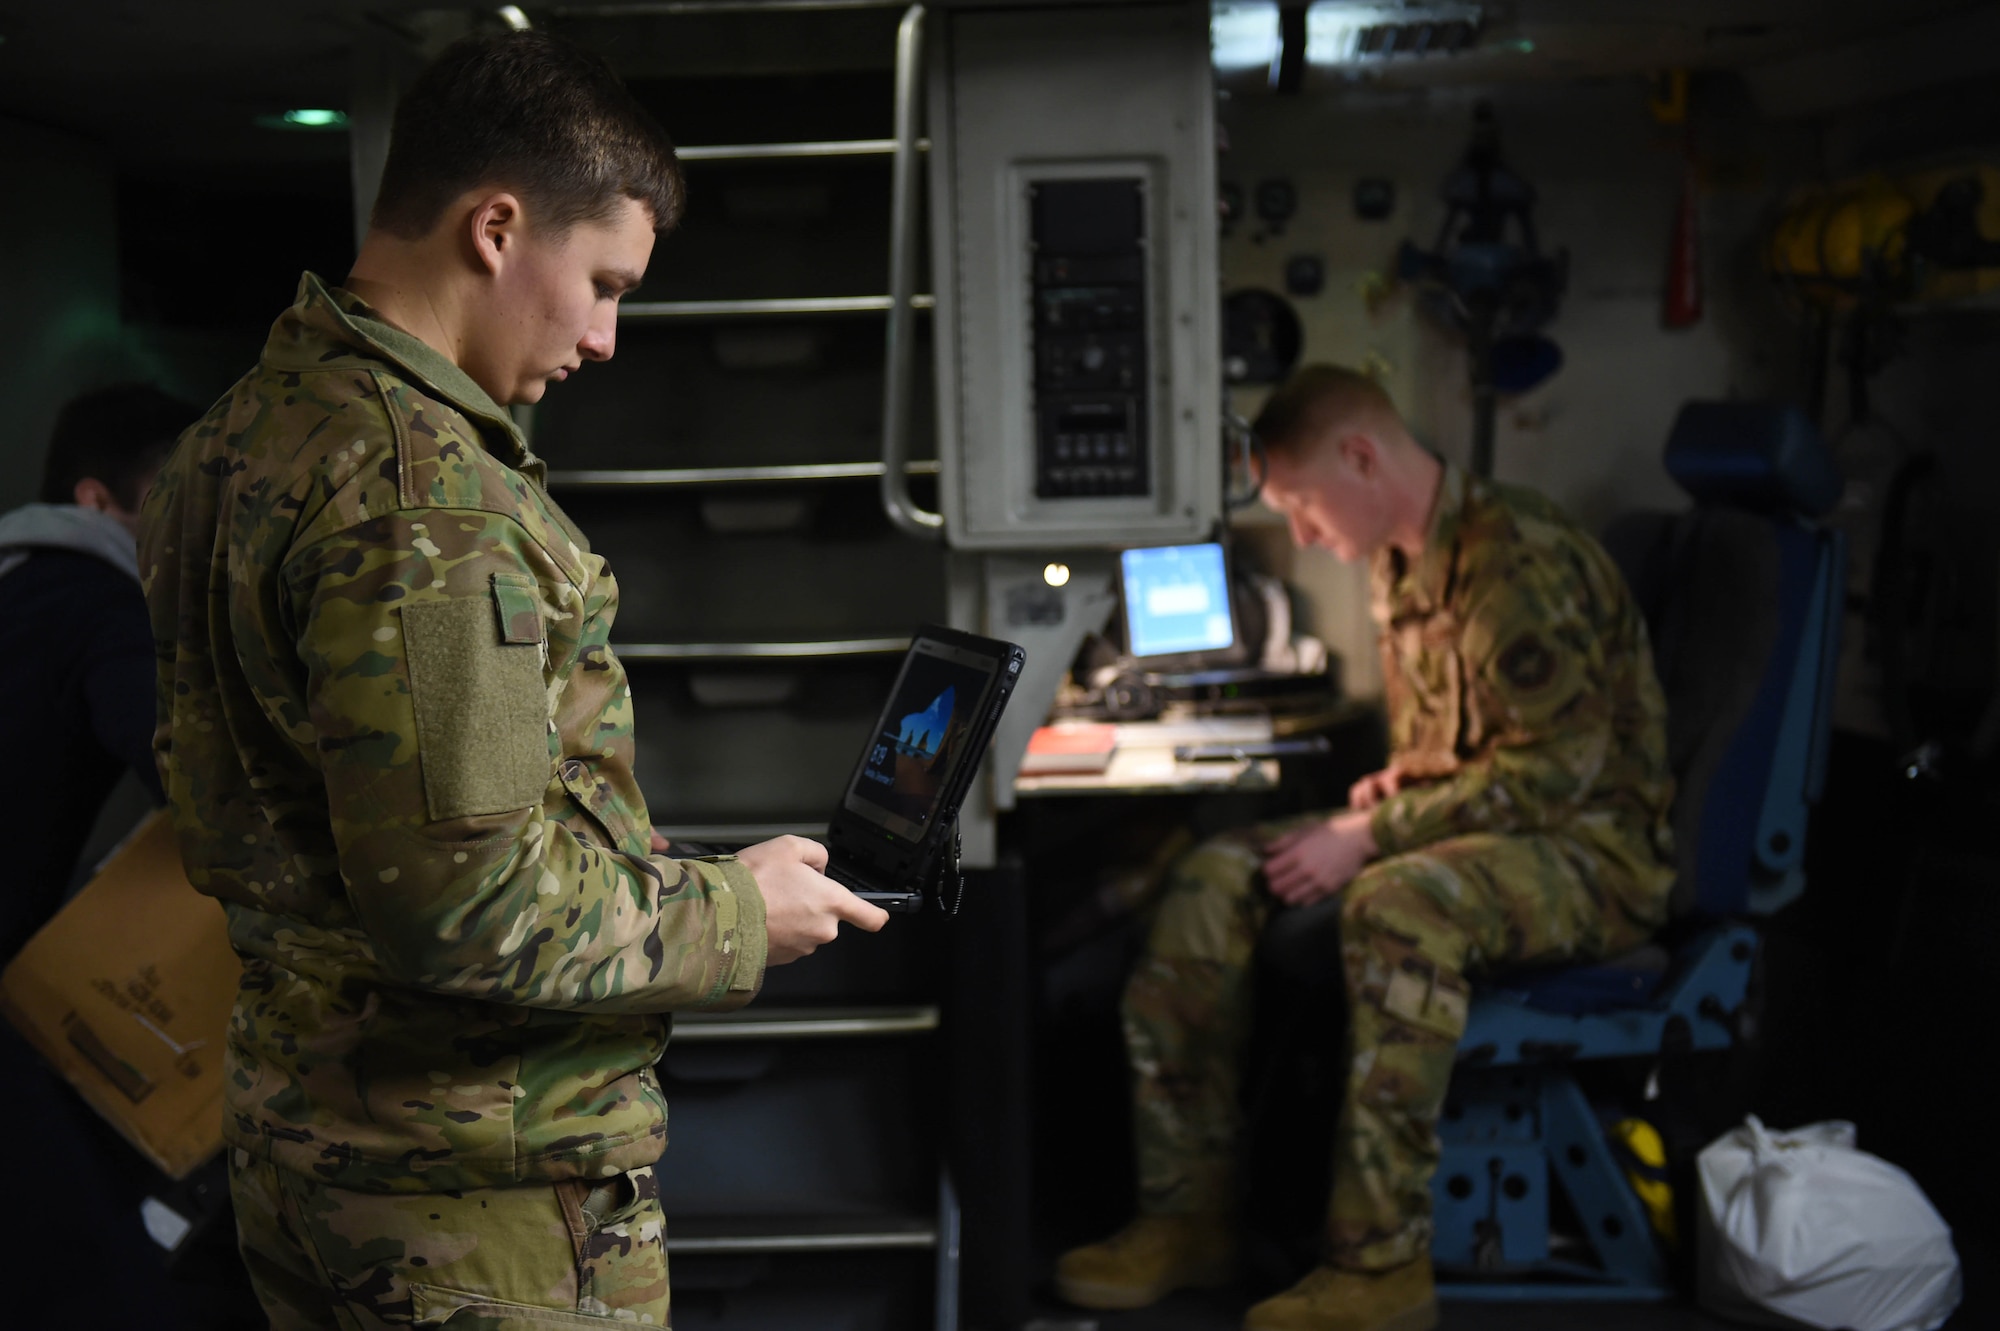 Airman 1st Classes Ryan Nelson and Kam Watt, 4th Airlift Squadron loadmasters, complete their pre-flight checklists aboard a C-17 Globemaster III before taking off from Spangdahlem Air Base, Germany, Dec. 18, 2019. The loadmaster pre-flight checklist includes things like making sure the oxygen masks are functional and that any cargo is safely secured. (U.S. Air Force photo by Airman 1st Class Mikayla Heineck)